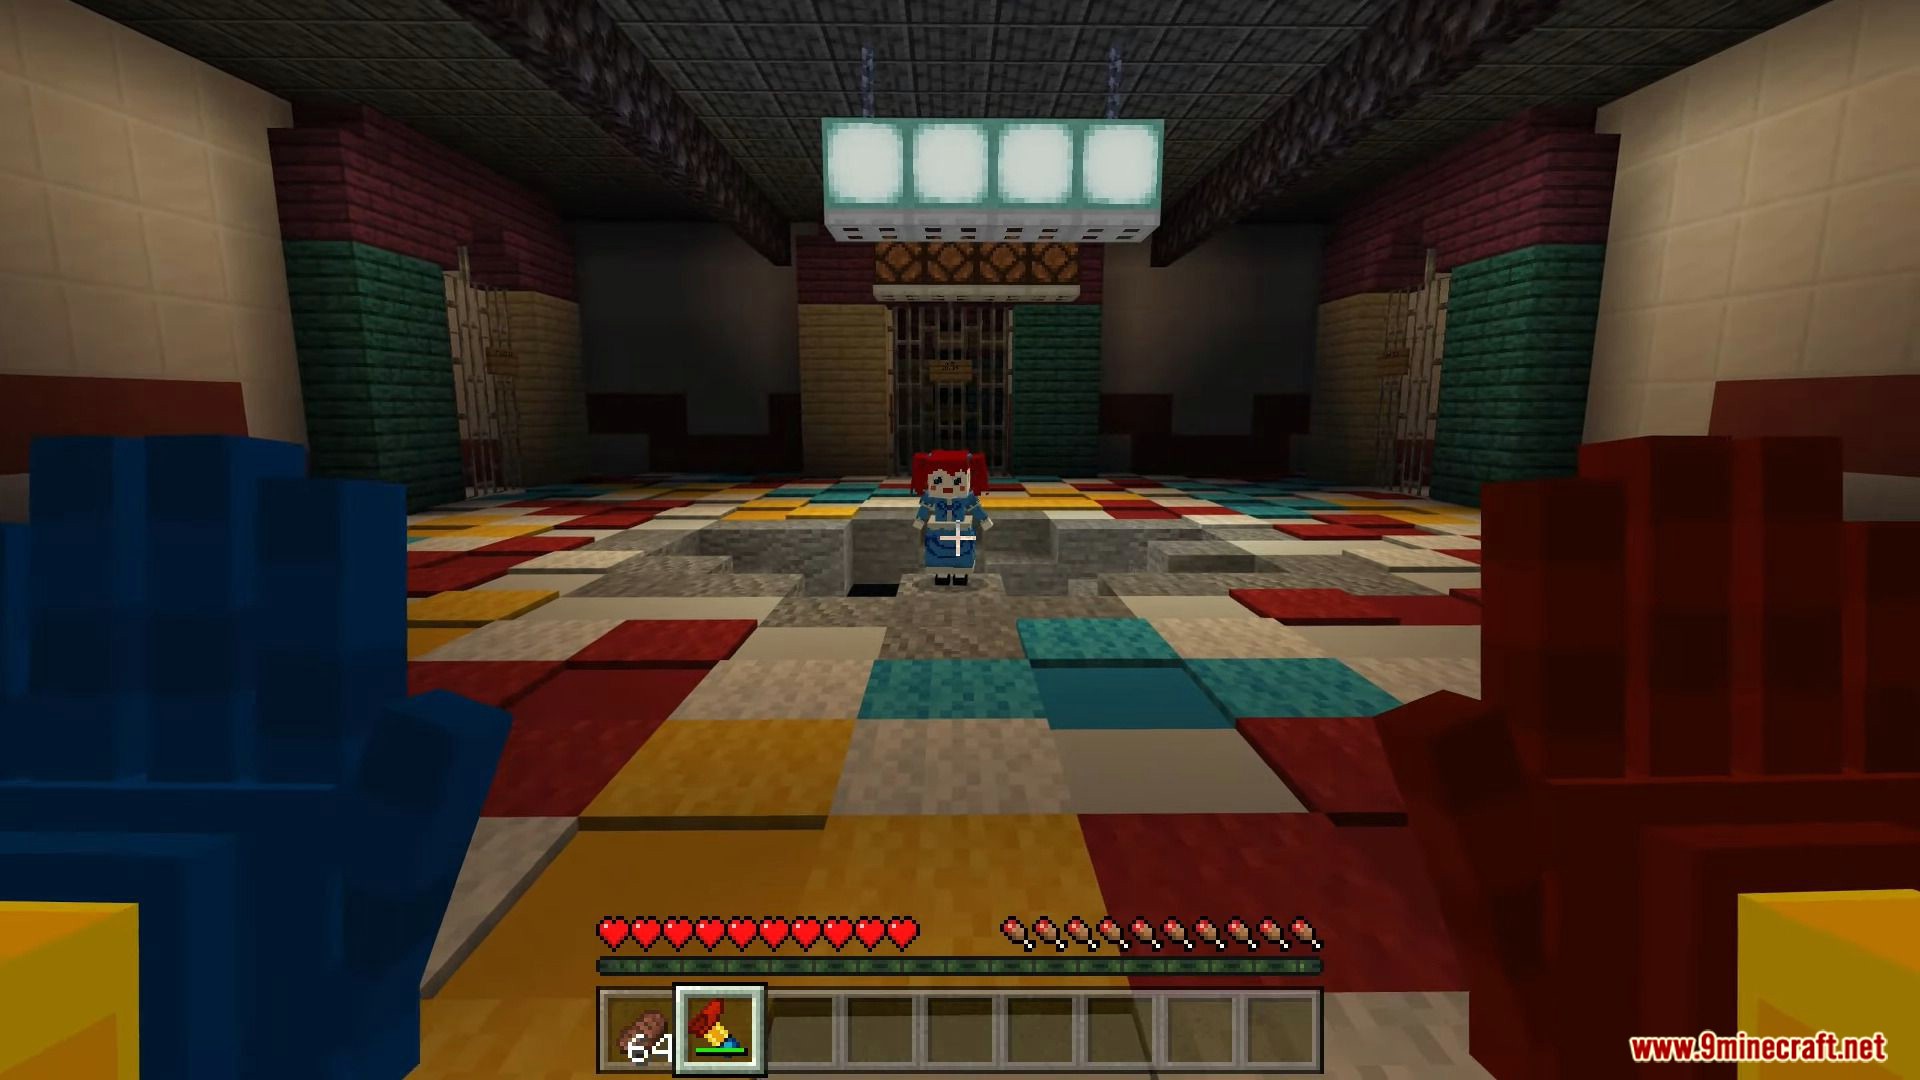 Poppy playtime chapter 2 Mod By ICEy - Mods for Minecraft